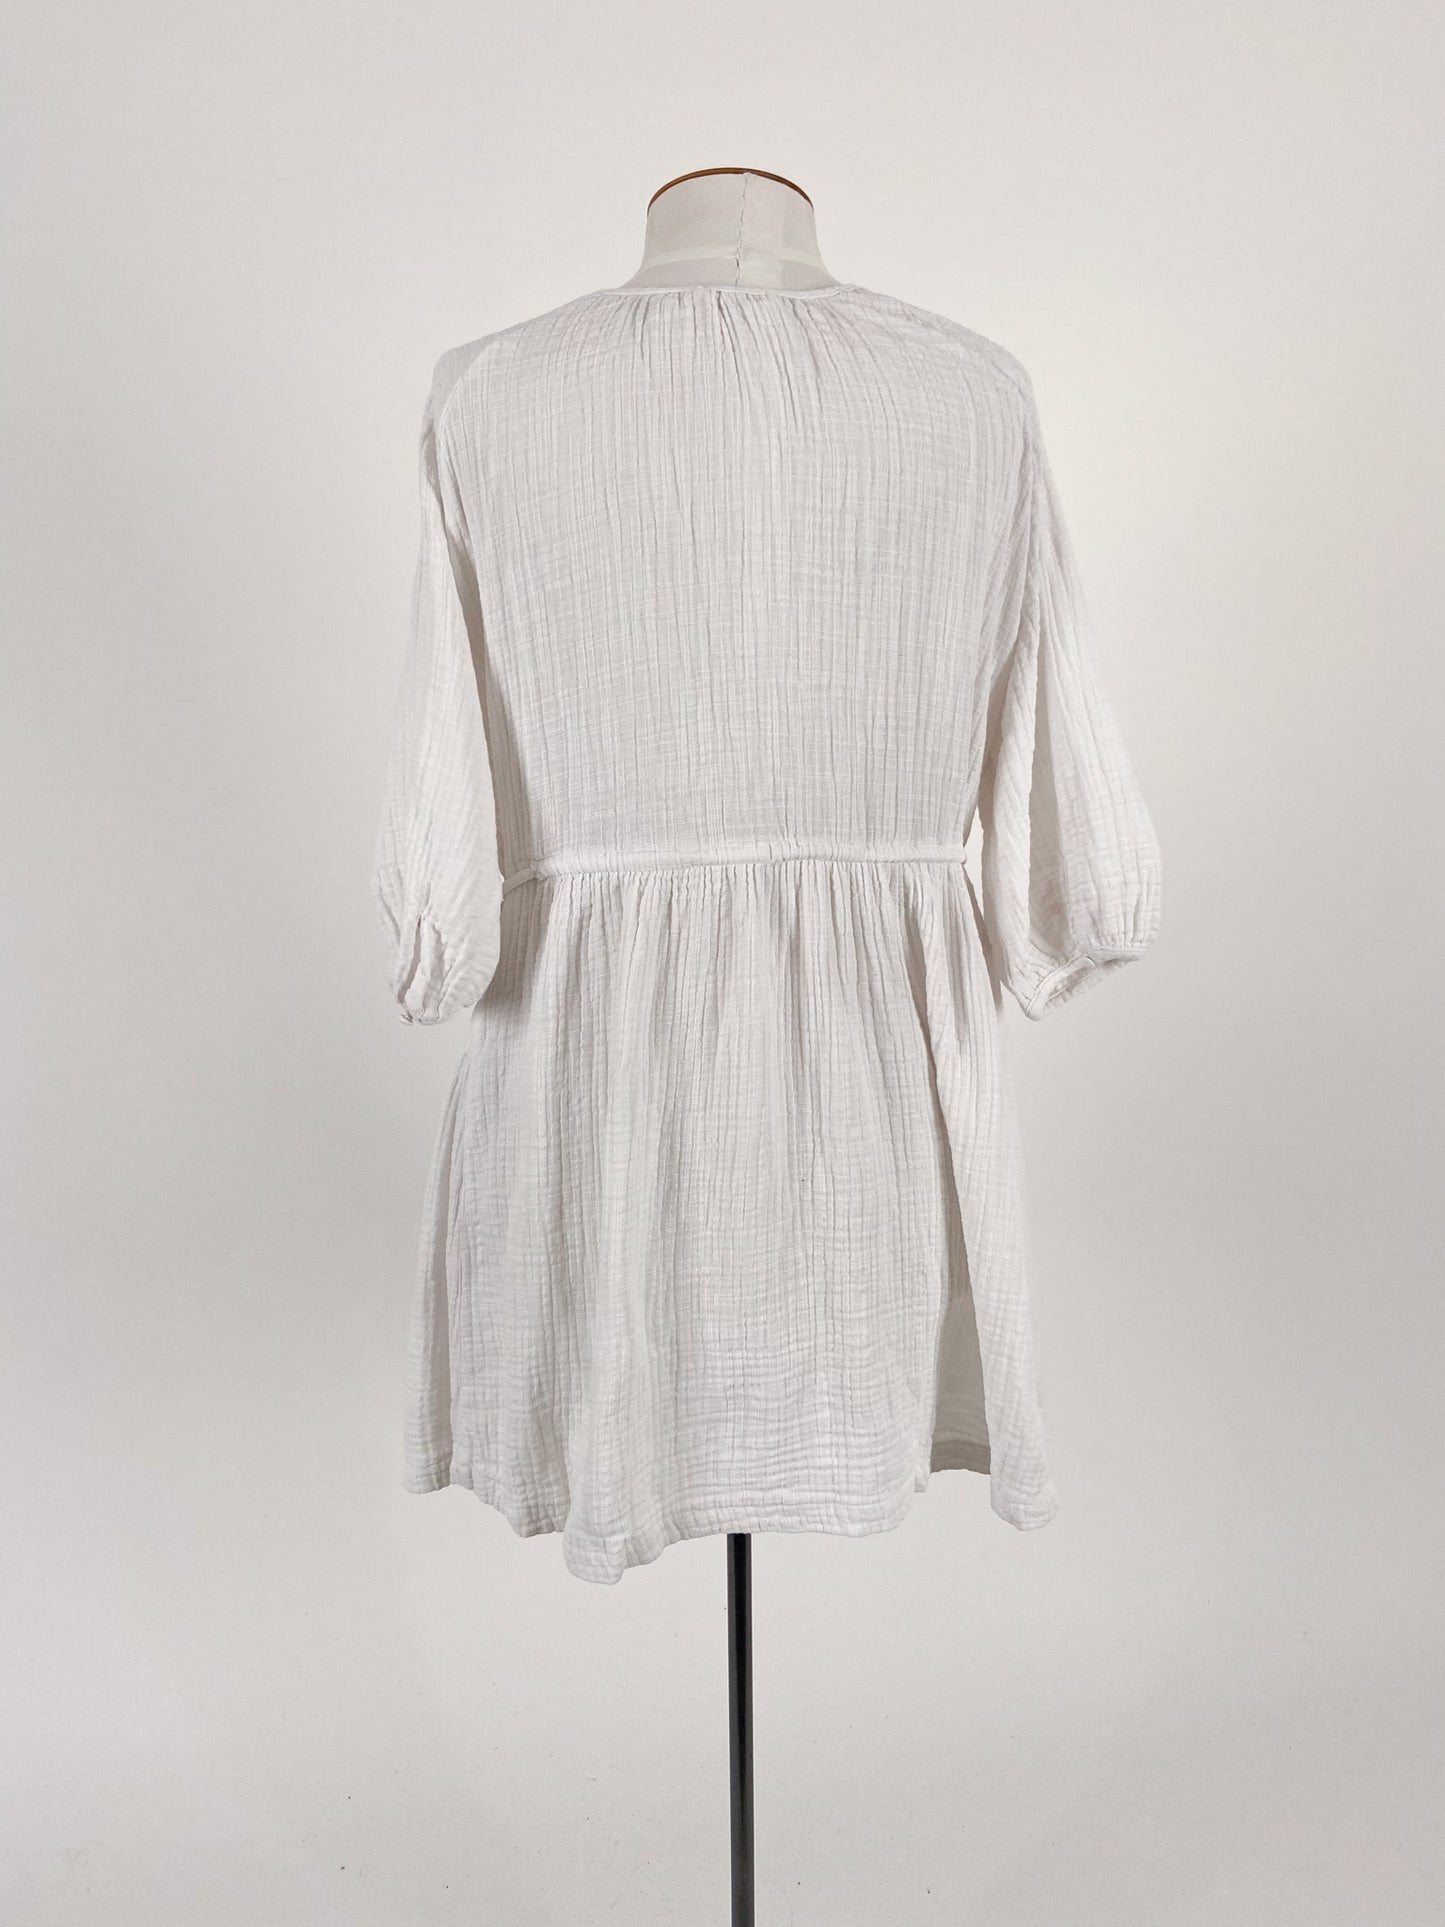 Glassons | White Casual/Cocktail Dress | Size 12